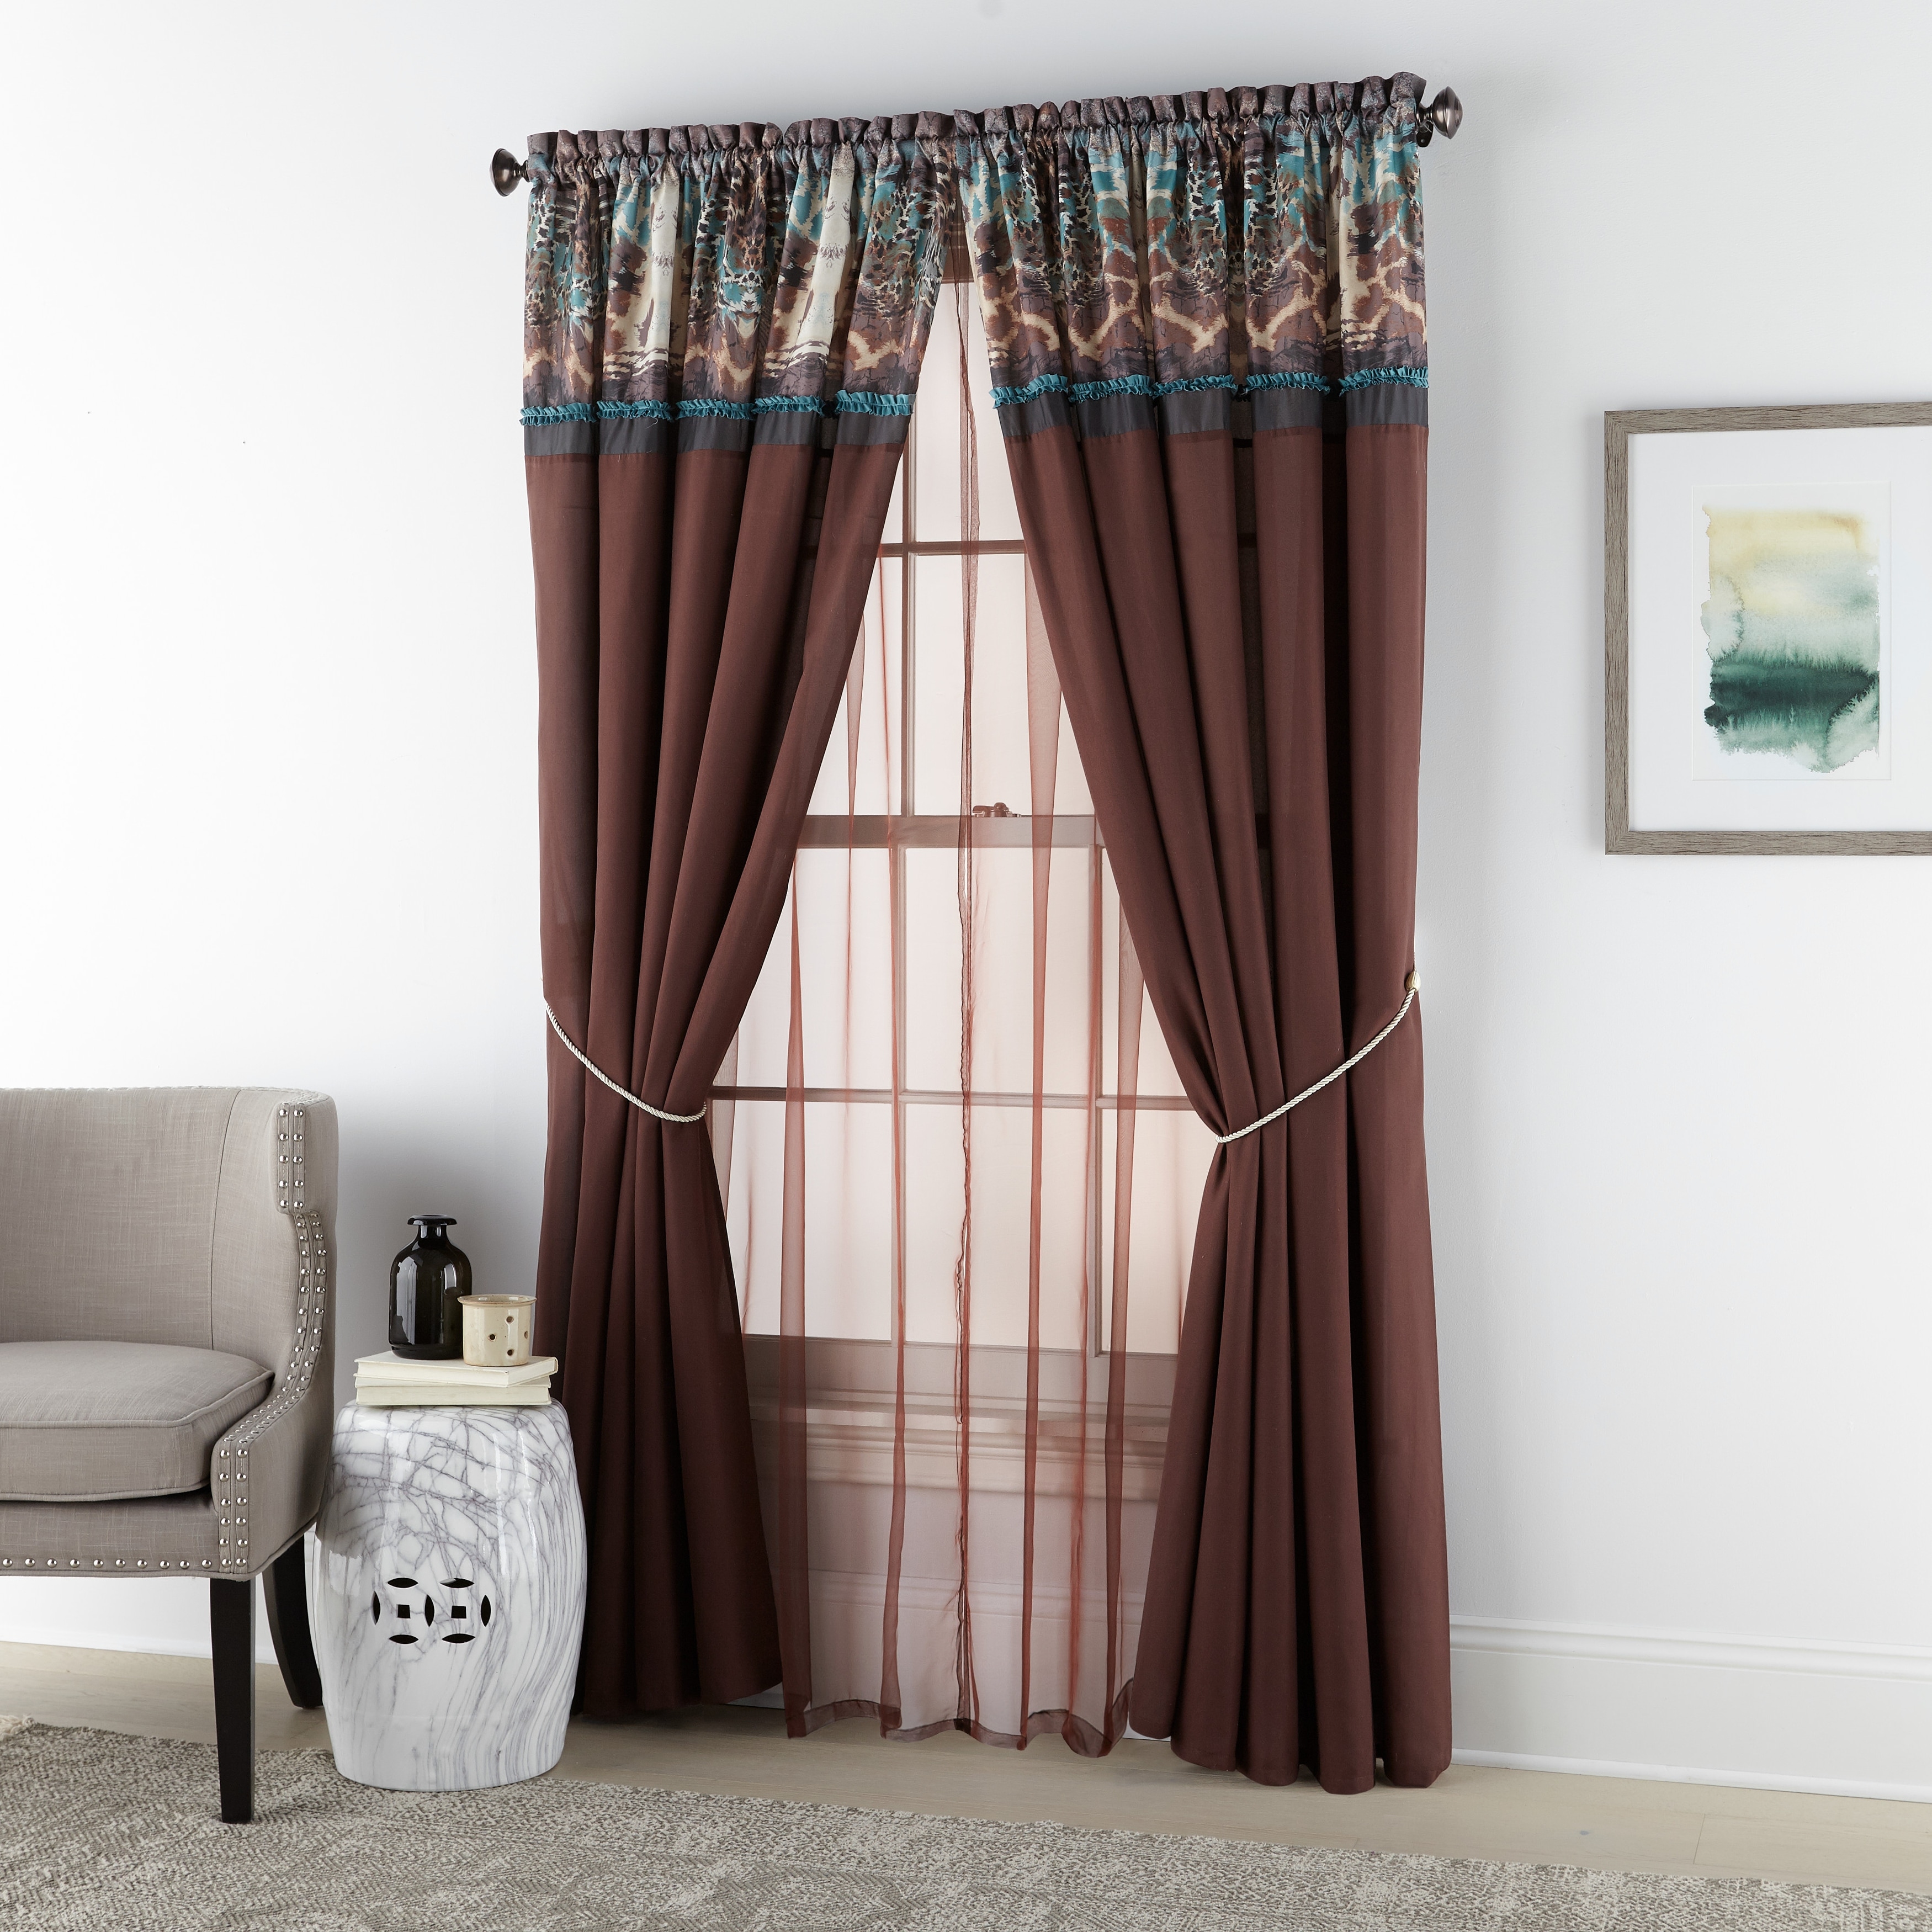 Good Looking voile valance Grand Avenue Viceroy 6 Piece Curtain Panel Valance Tieback Set 56 W X 84 L Overstock 31974506